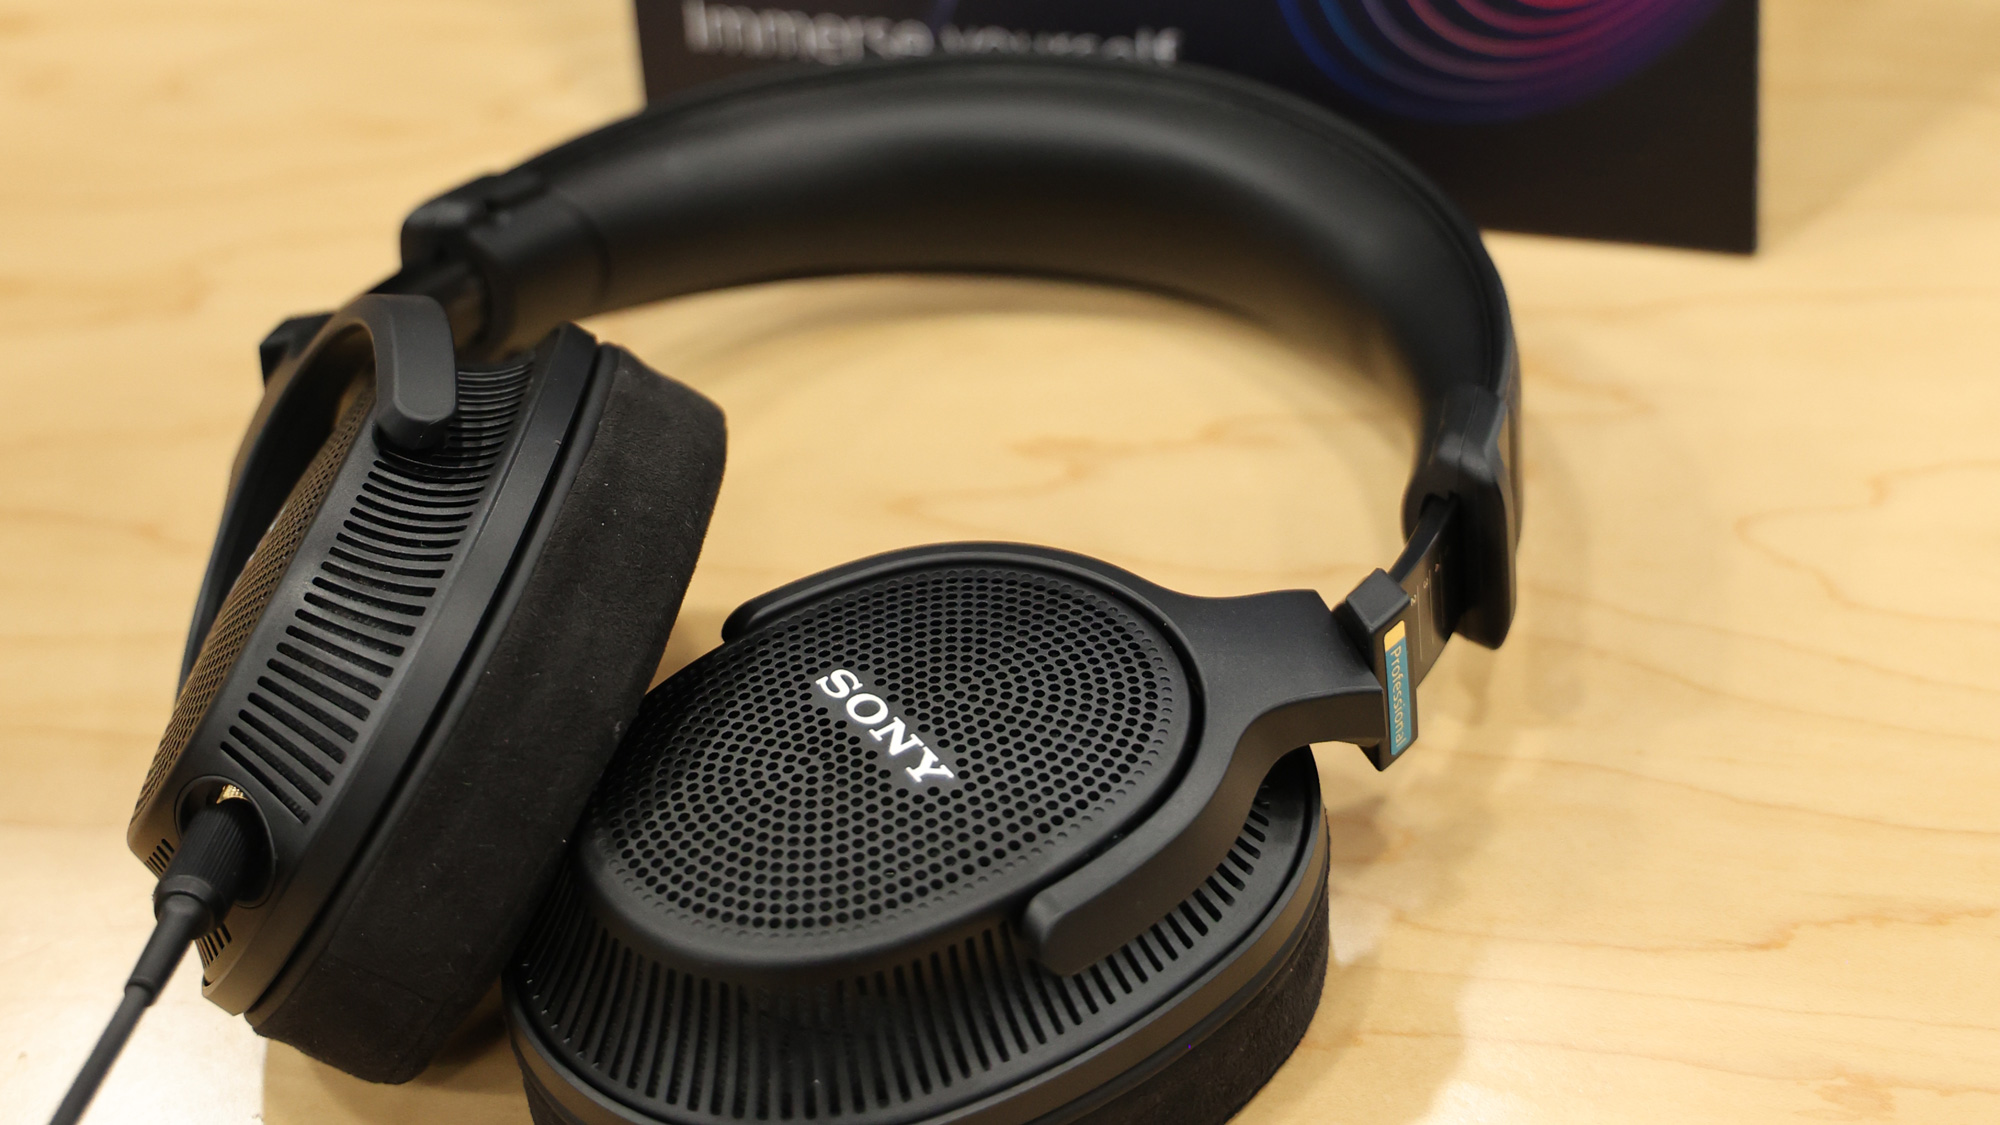 Sony's new headphones are for spatial audio production